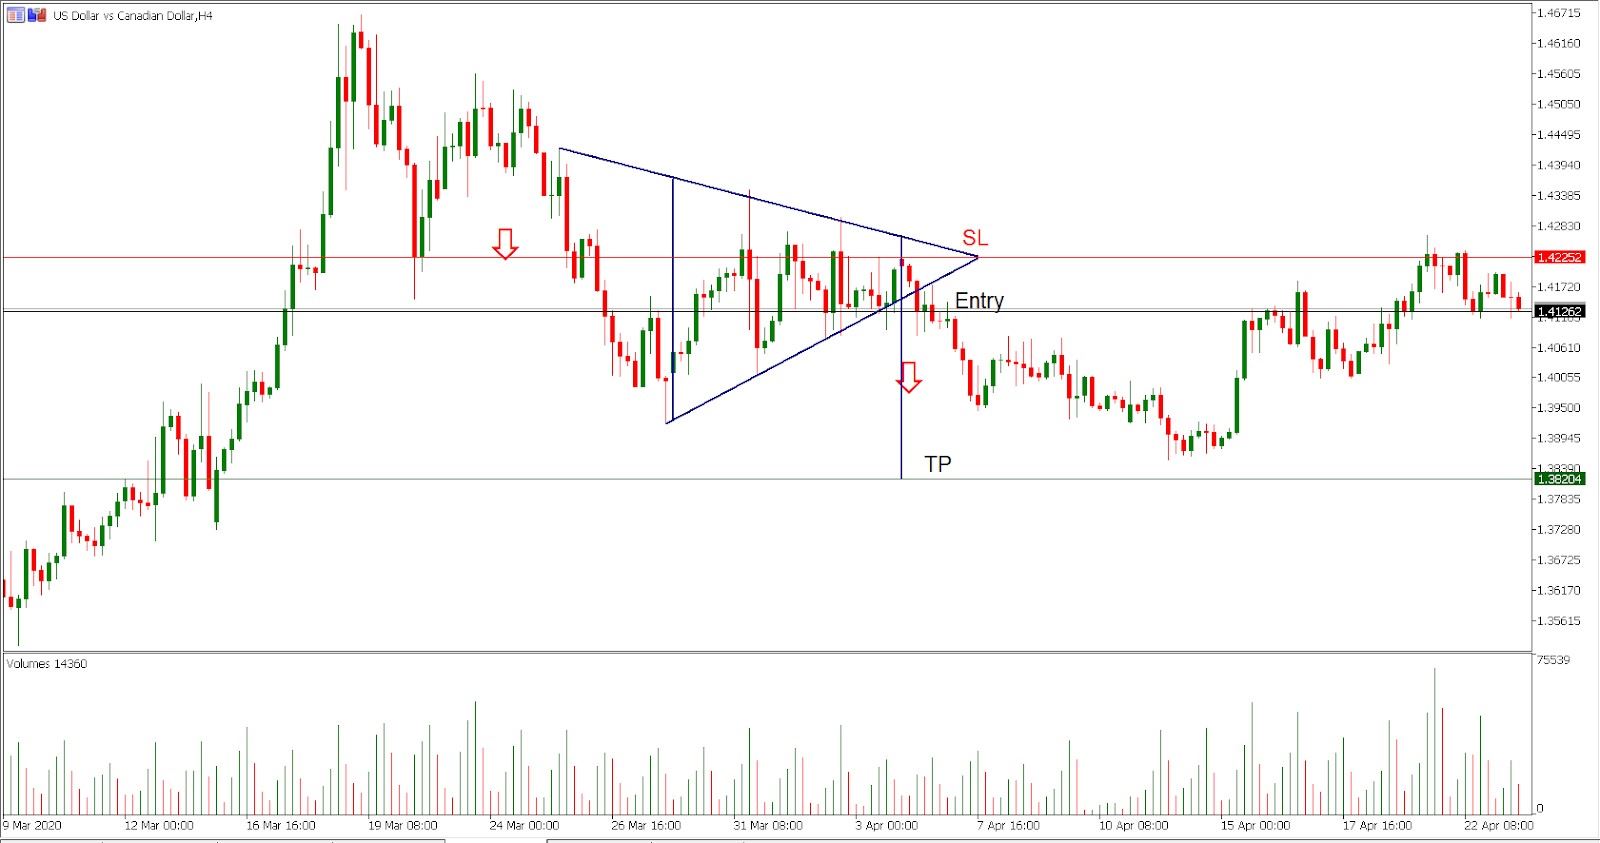 USD/CAD H4 chart - Trading the pattern